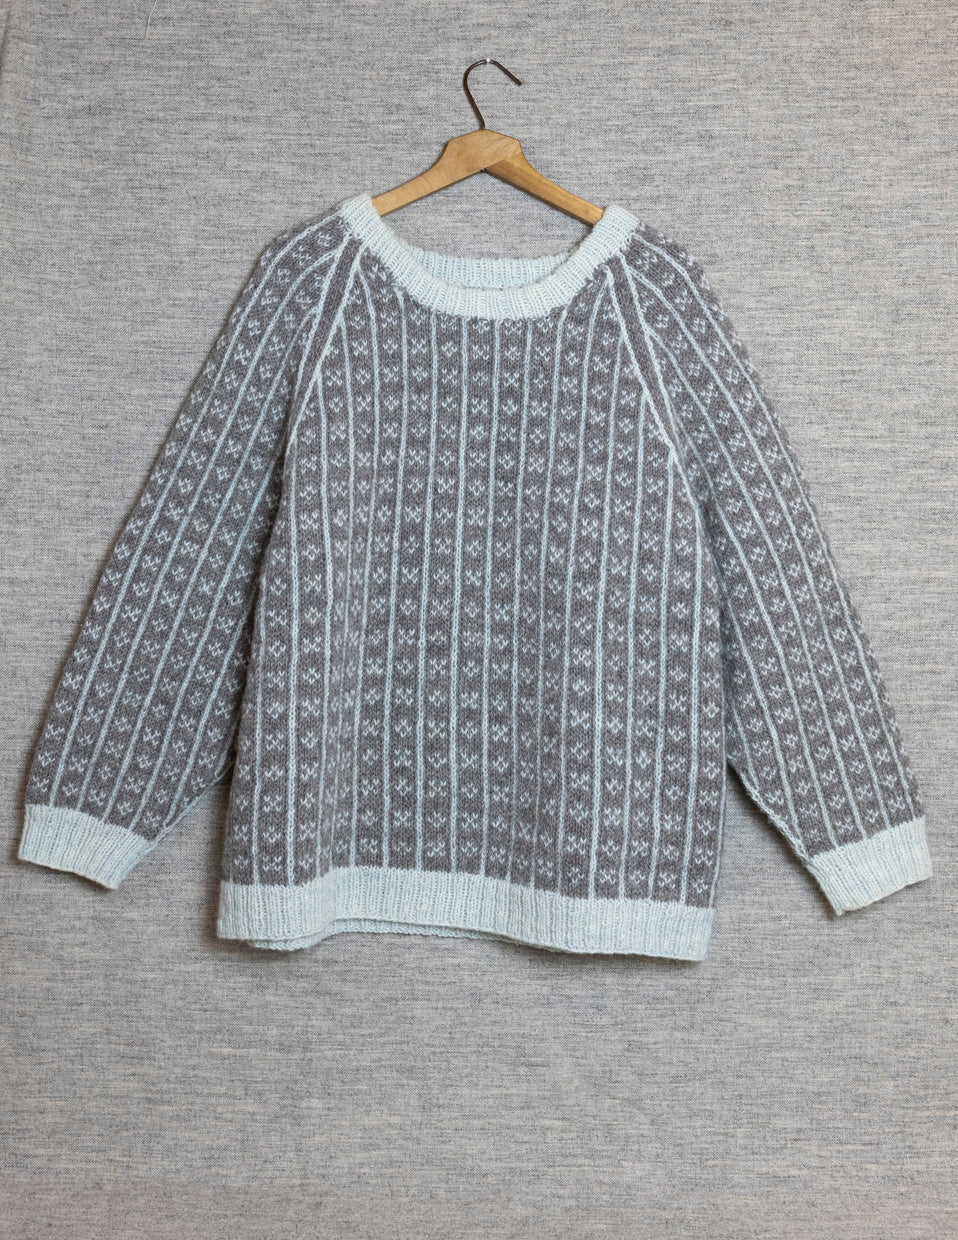 Islander sweater with stripes, 3-ply, knitting kit